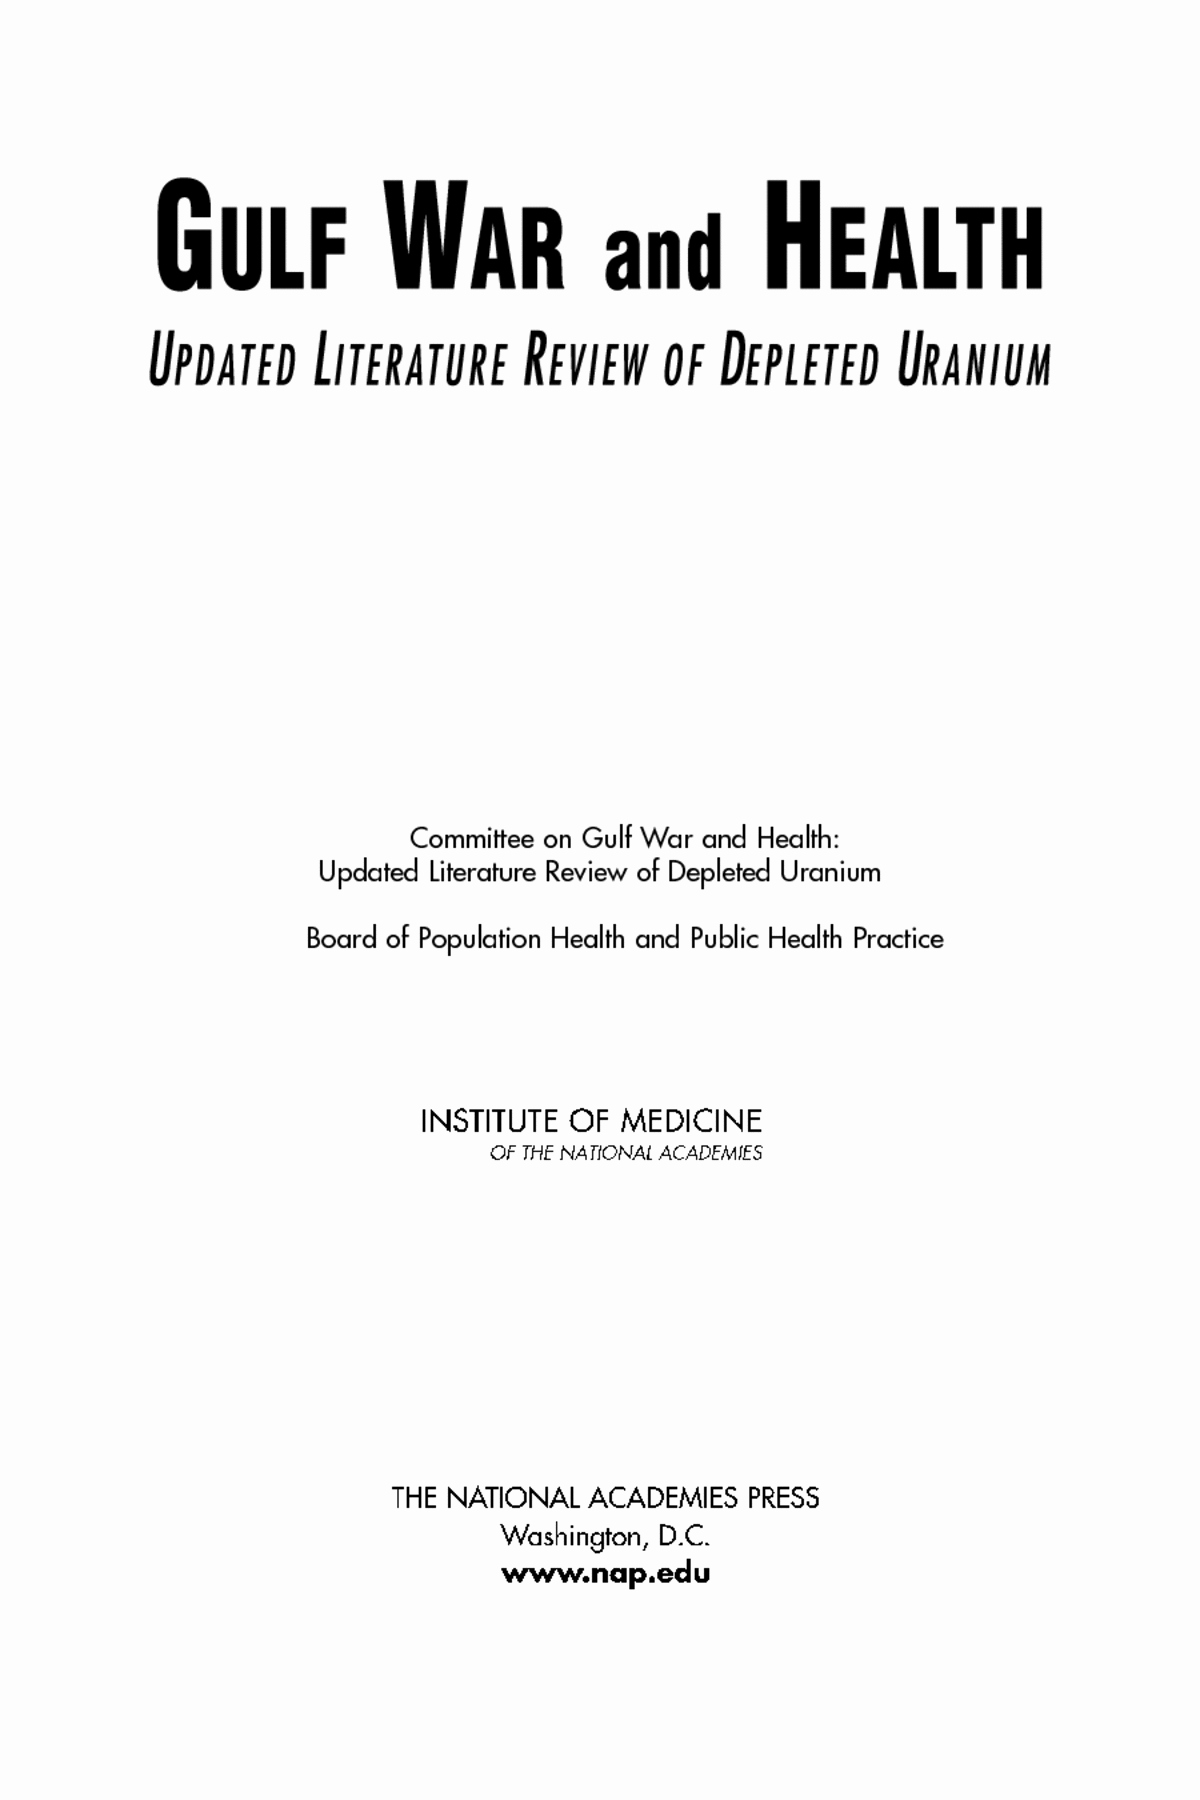 Cover Page for Literature Review Best Of Cover Page for Literature Review